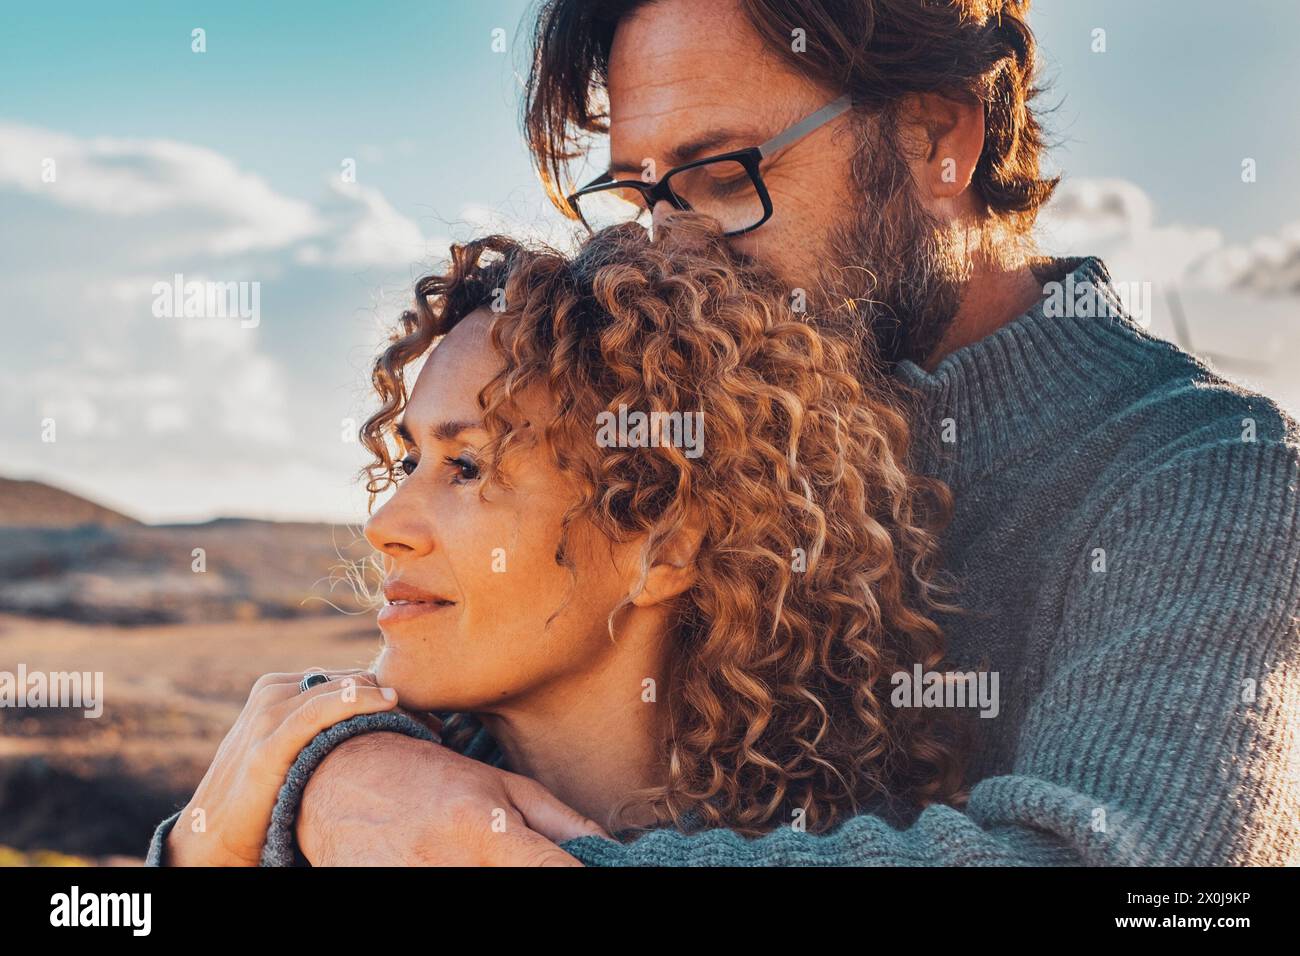 Young adult couple in love in outdoor leisure activity admiring travel destination. Contemplation. People traveler and adventure lifestyle. Man hug woman from behind. Looking away, togetherness two Stock Photo